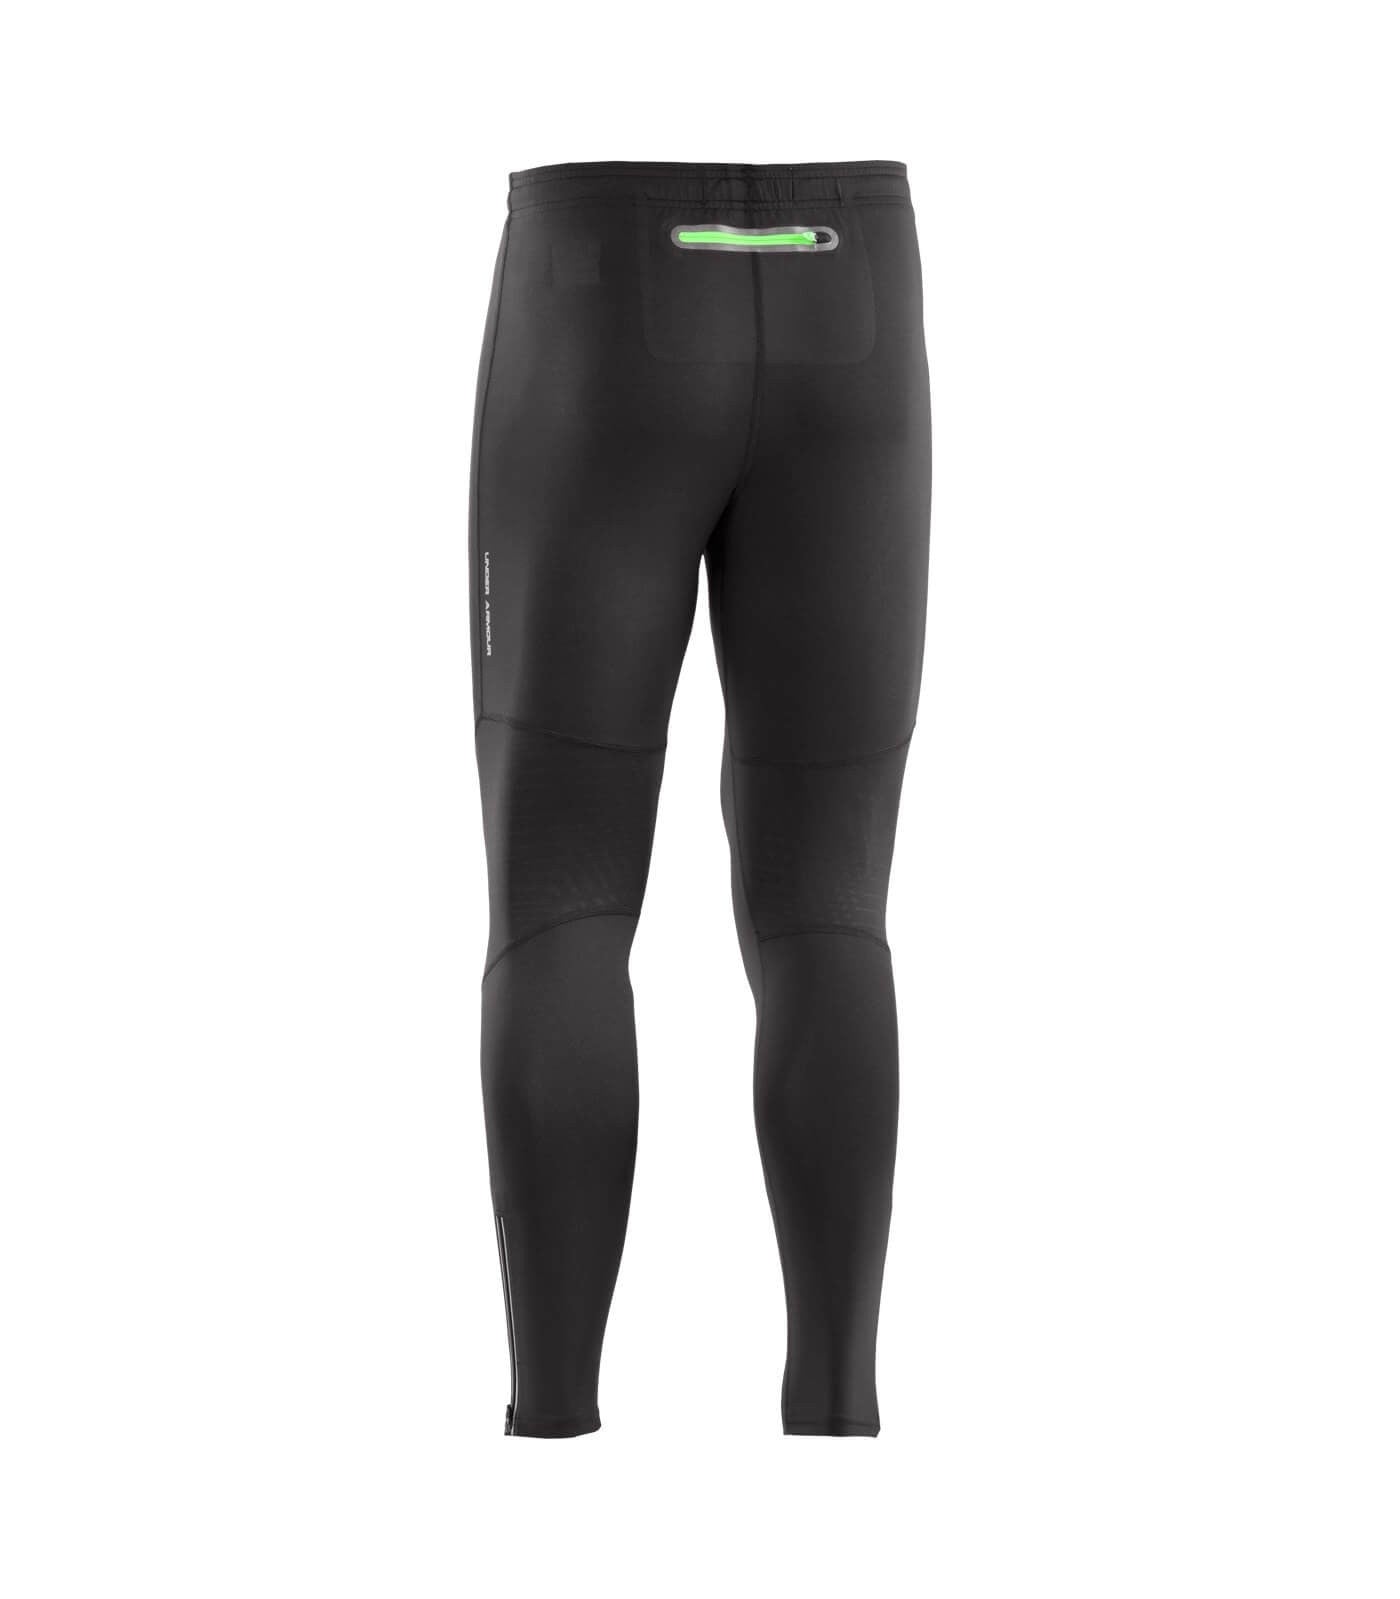 Under Armour Mens Run Compression Tights